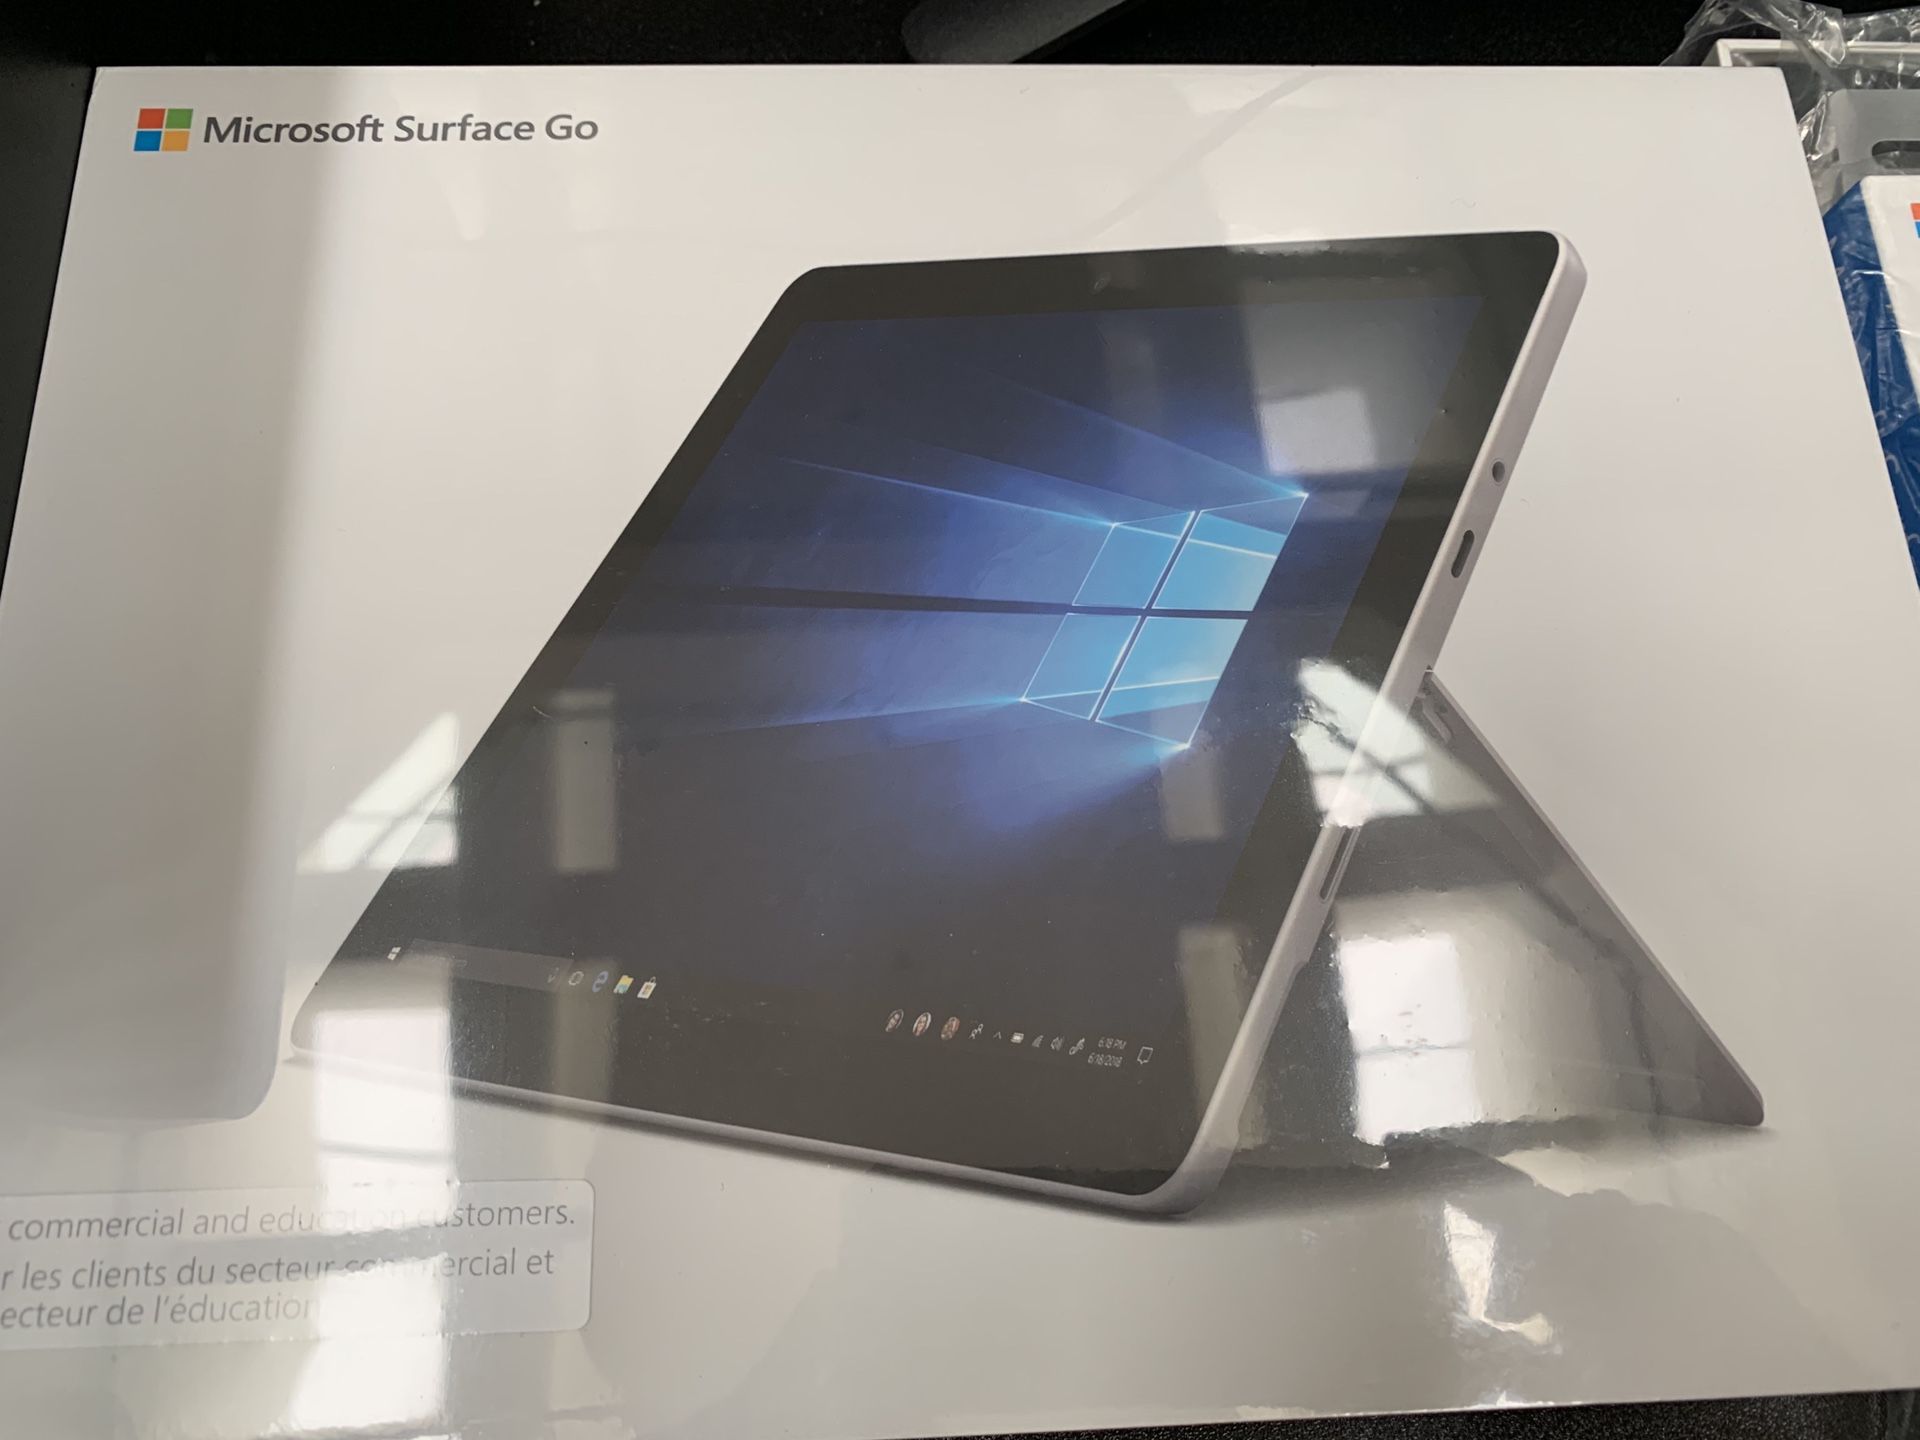 Microsoft surface Go brand new sealed comes with keyboard and pen